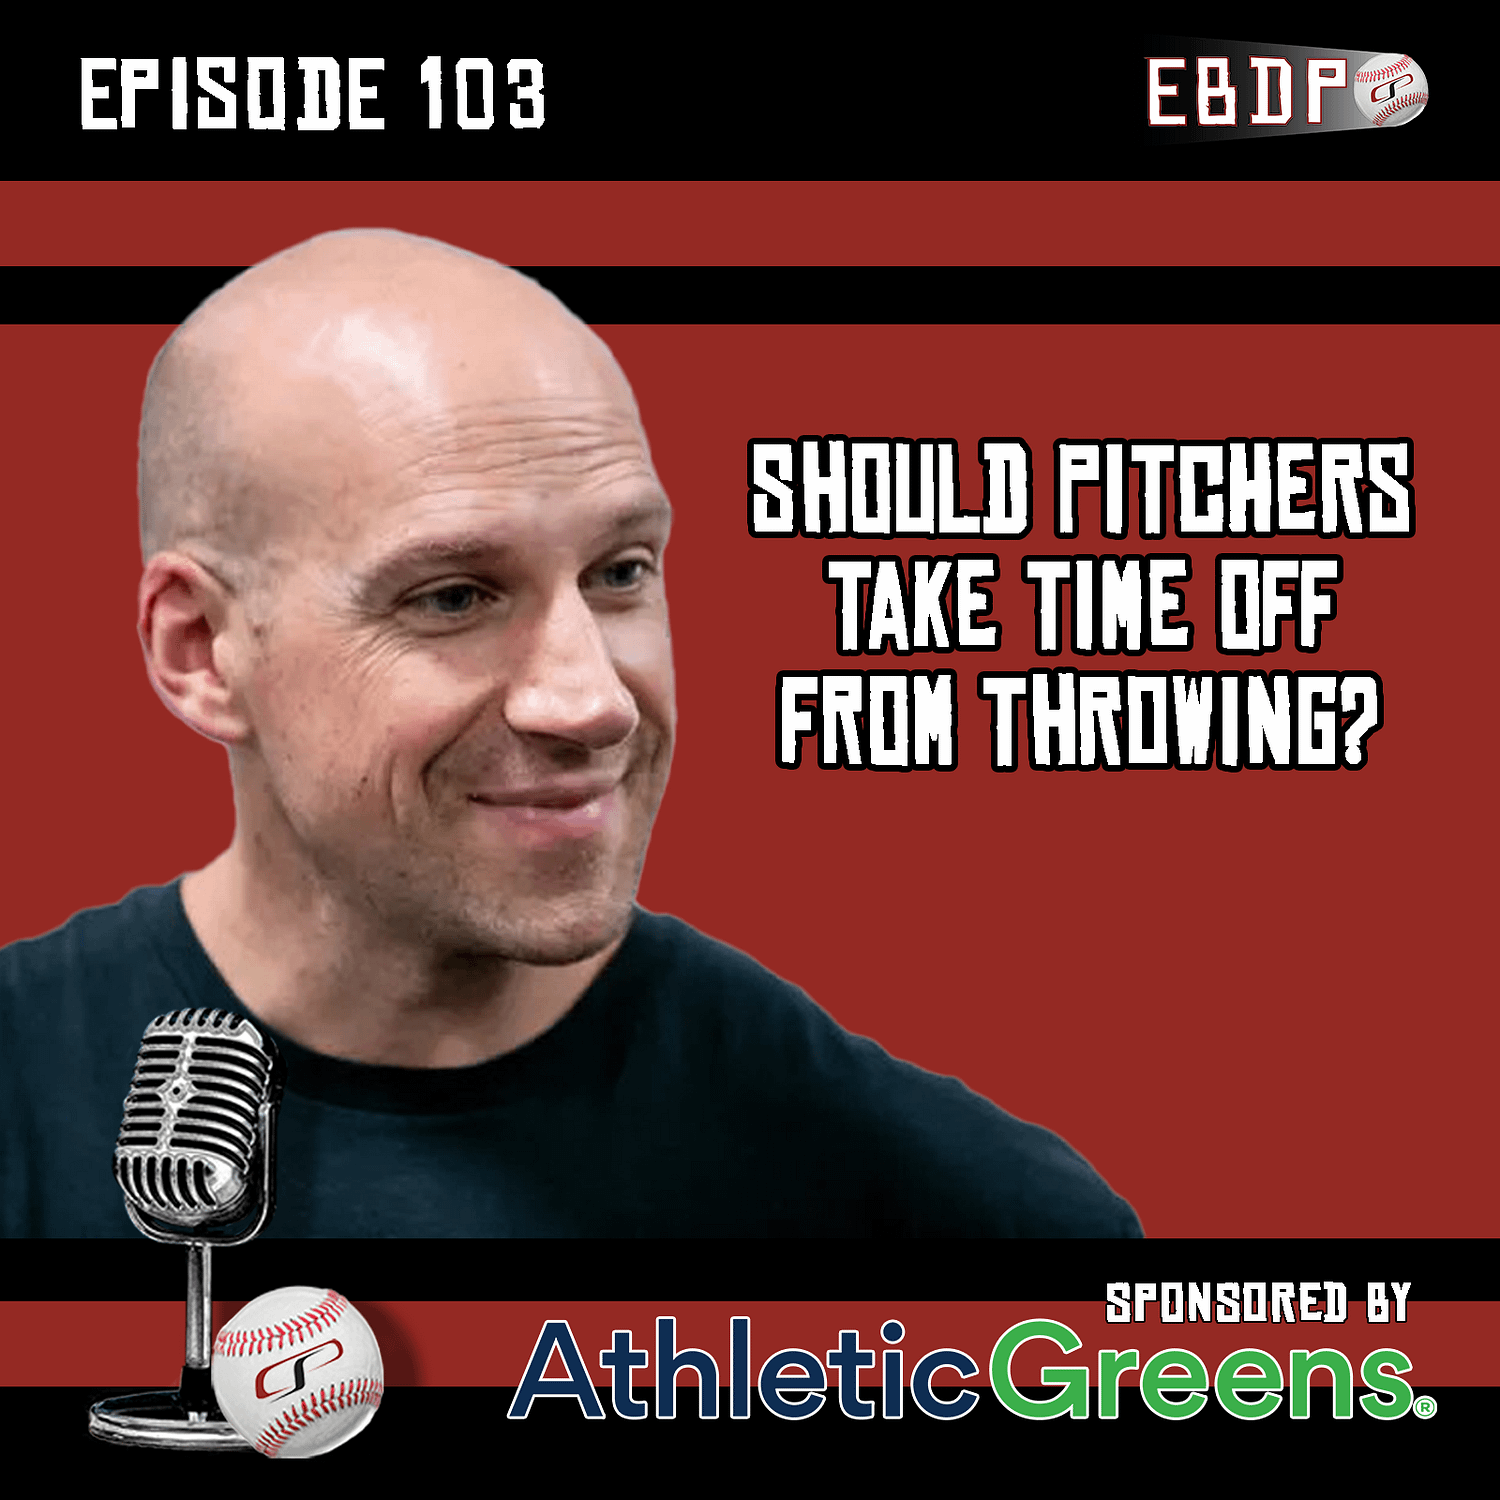 Should Pitchers Take Time Off From Throwing?